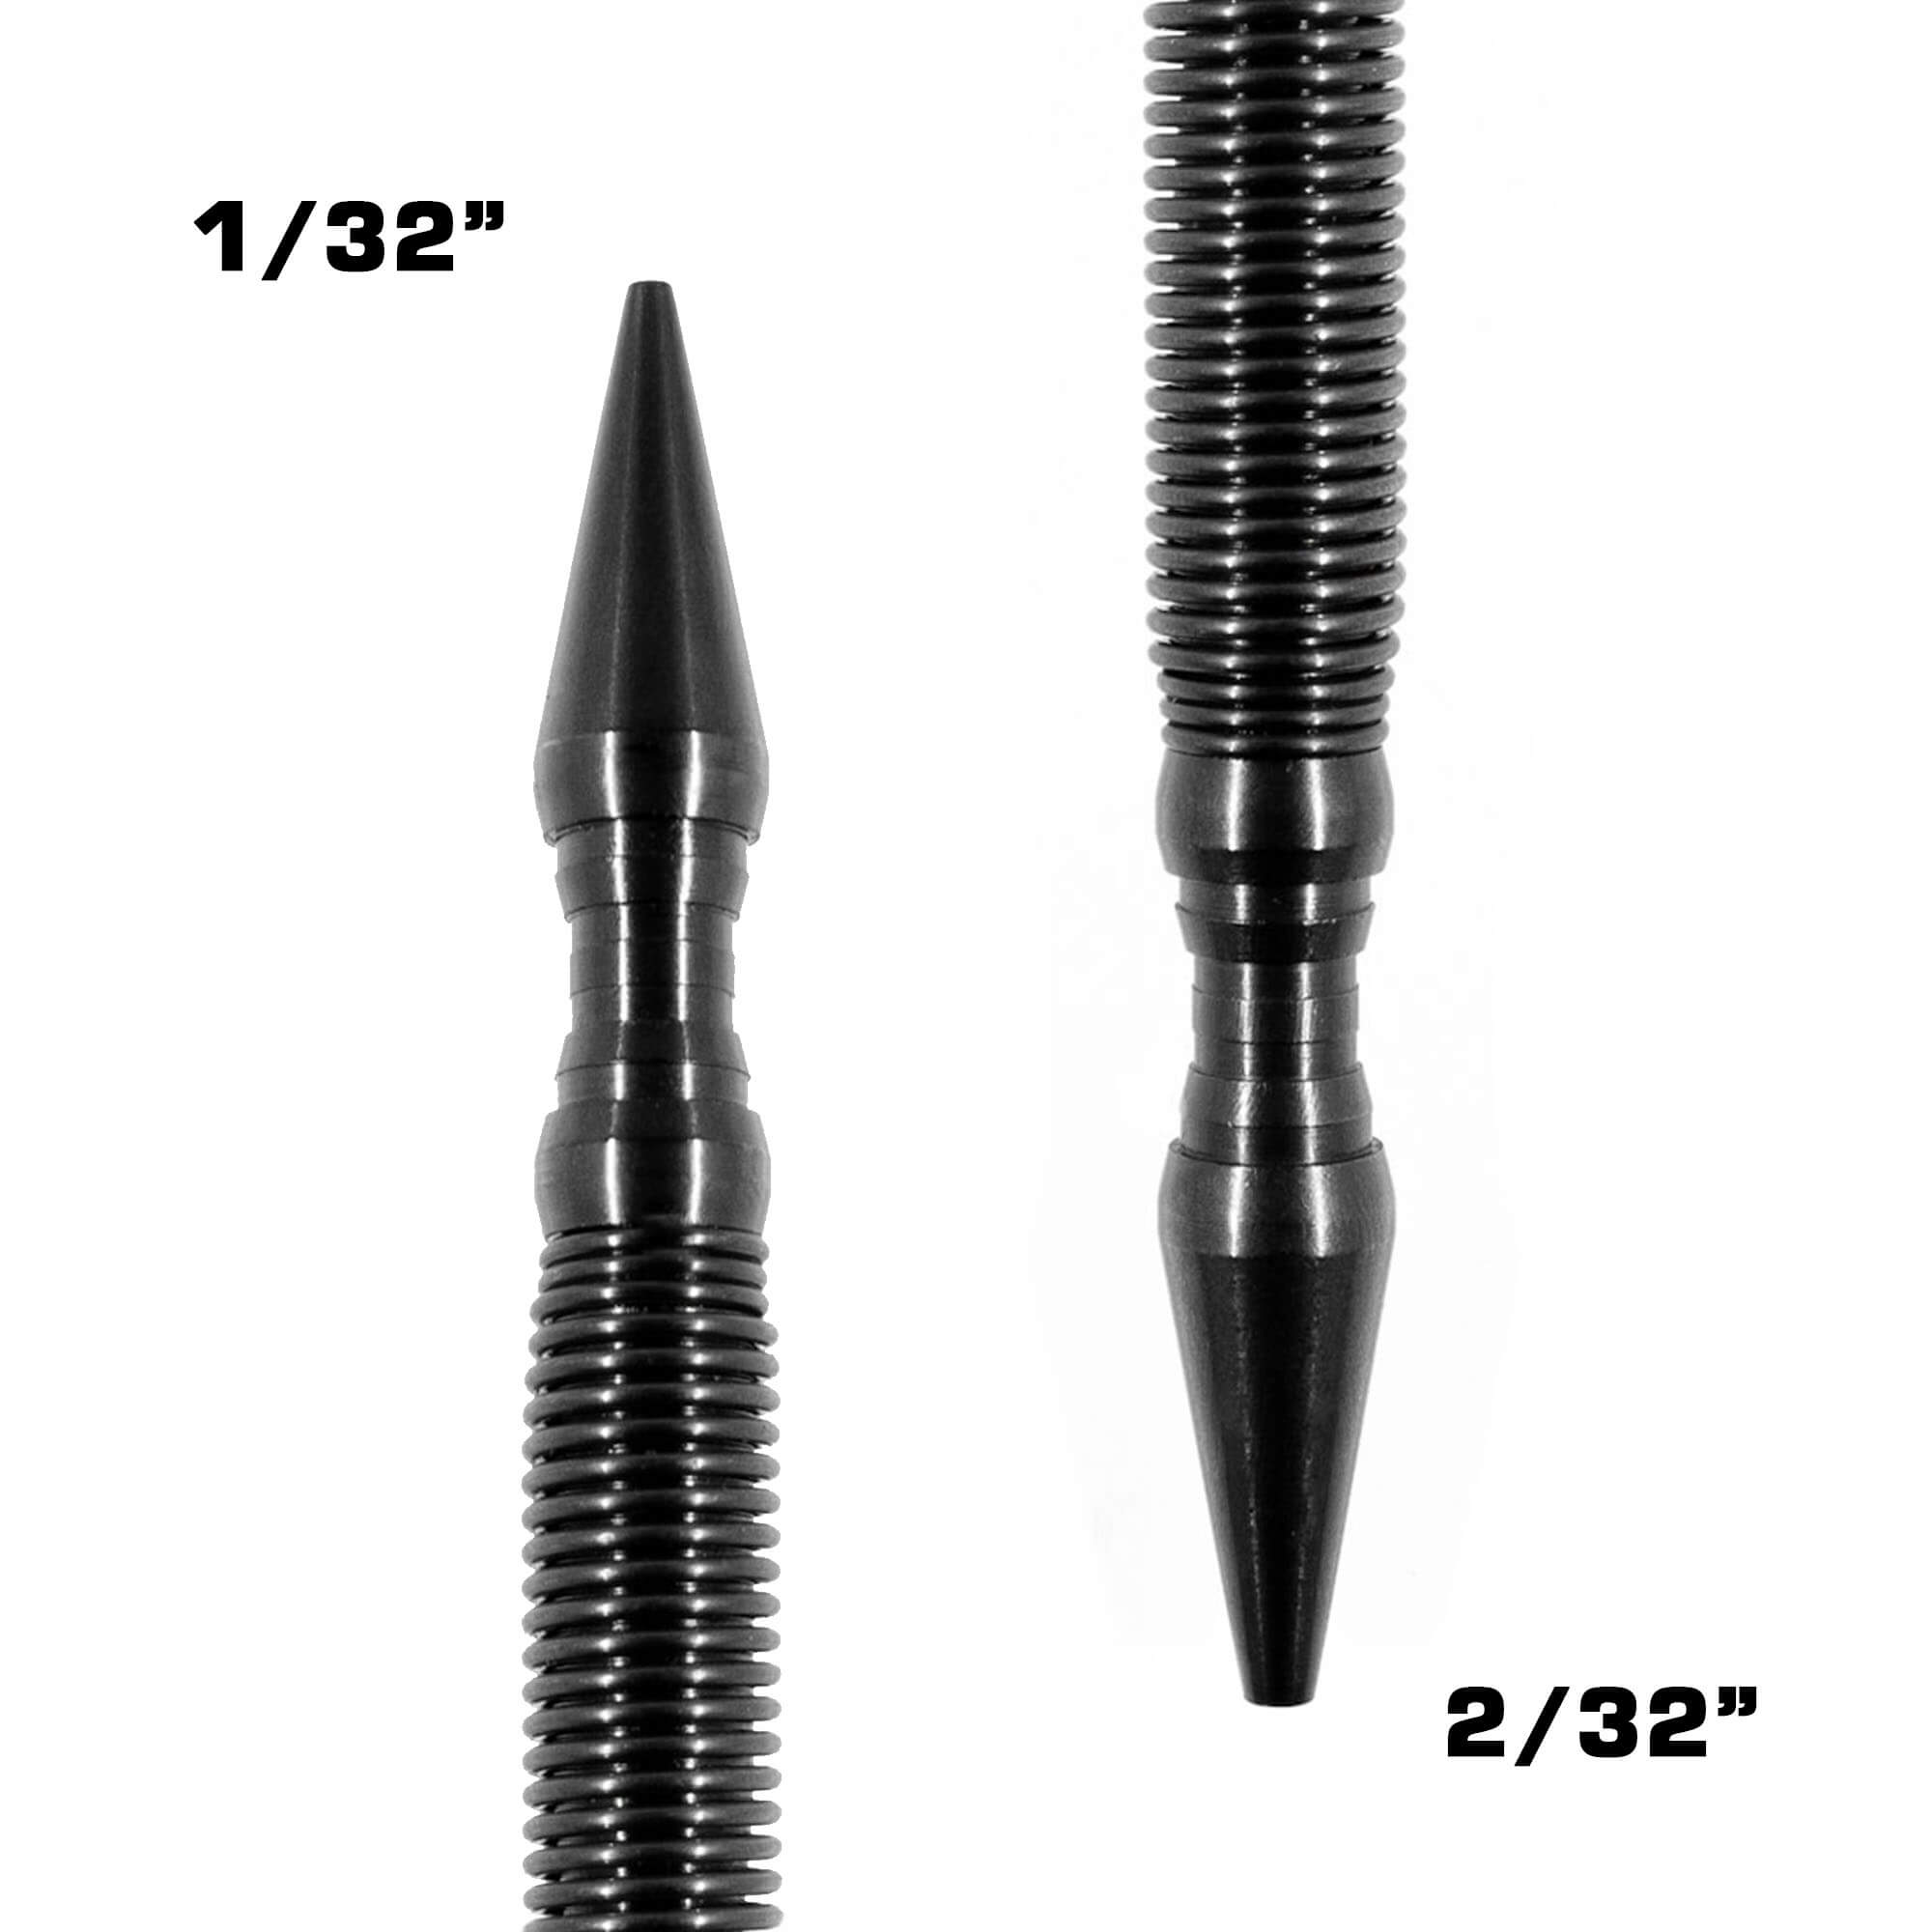 1/32" and 2/32" Dual Head Nail Setter